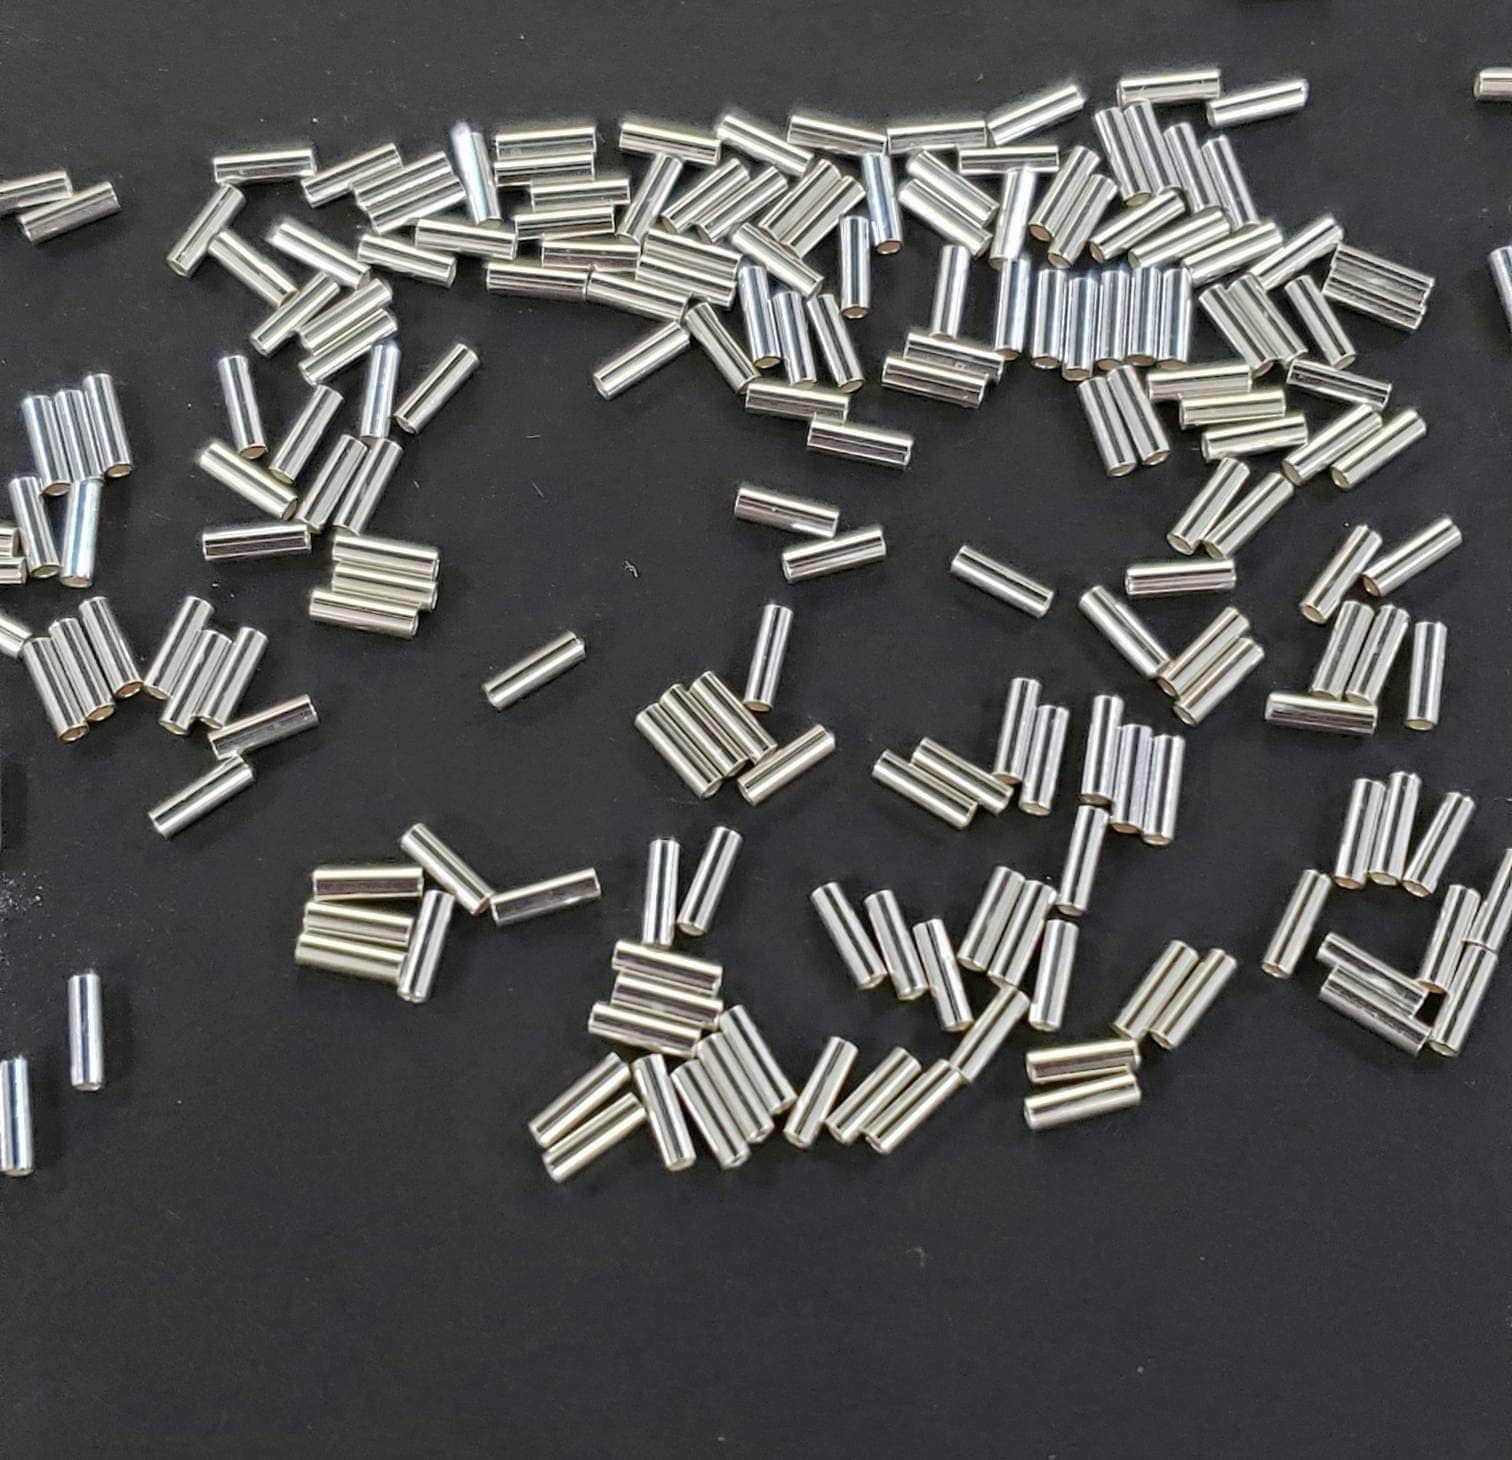 925 Sterling Silver 3.5mm Liquid Silver, Made in USA, high Quality tube spacer jewelry making supplies. 50 pcs, 100, 300 ,500 pcs